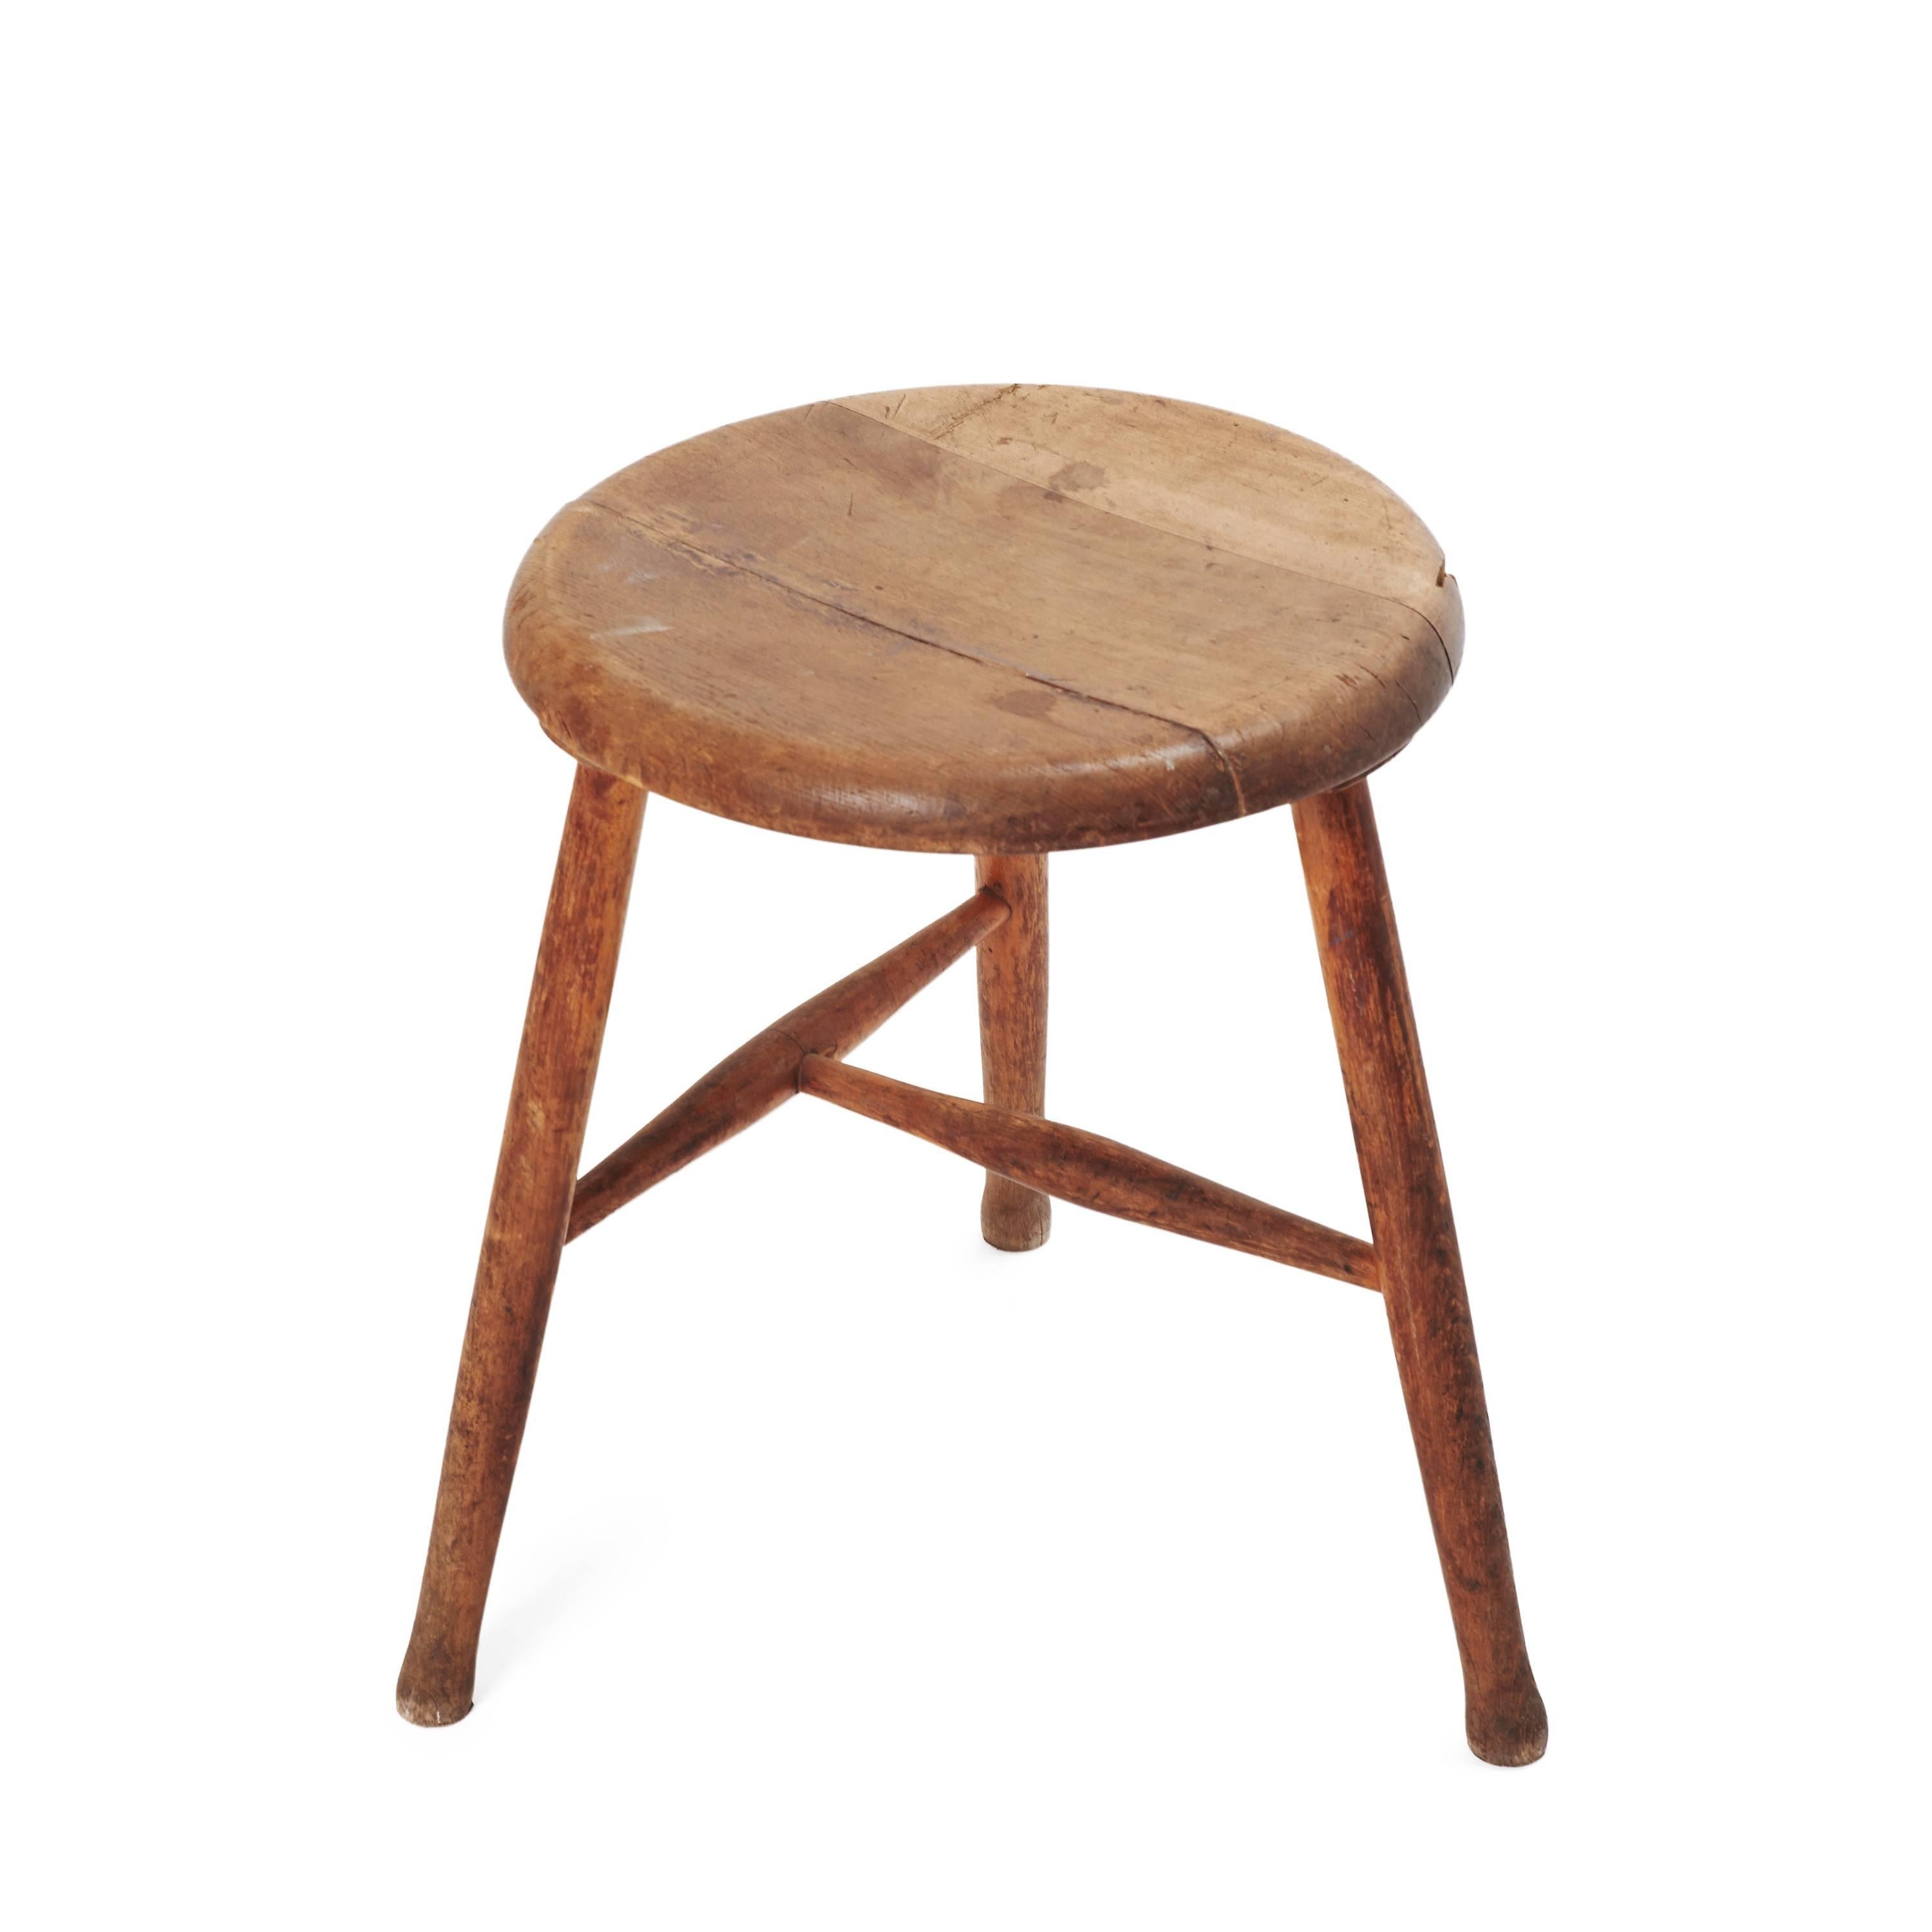 Vintage Wooden Stool In Distressed Condition For Sale In Los Angeles, CA